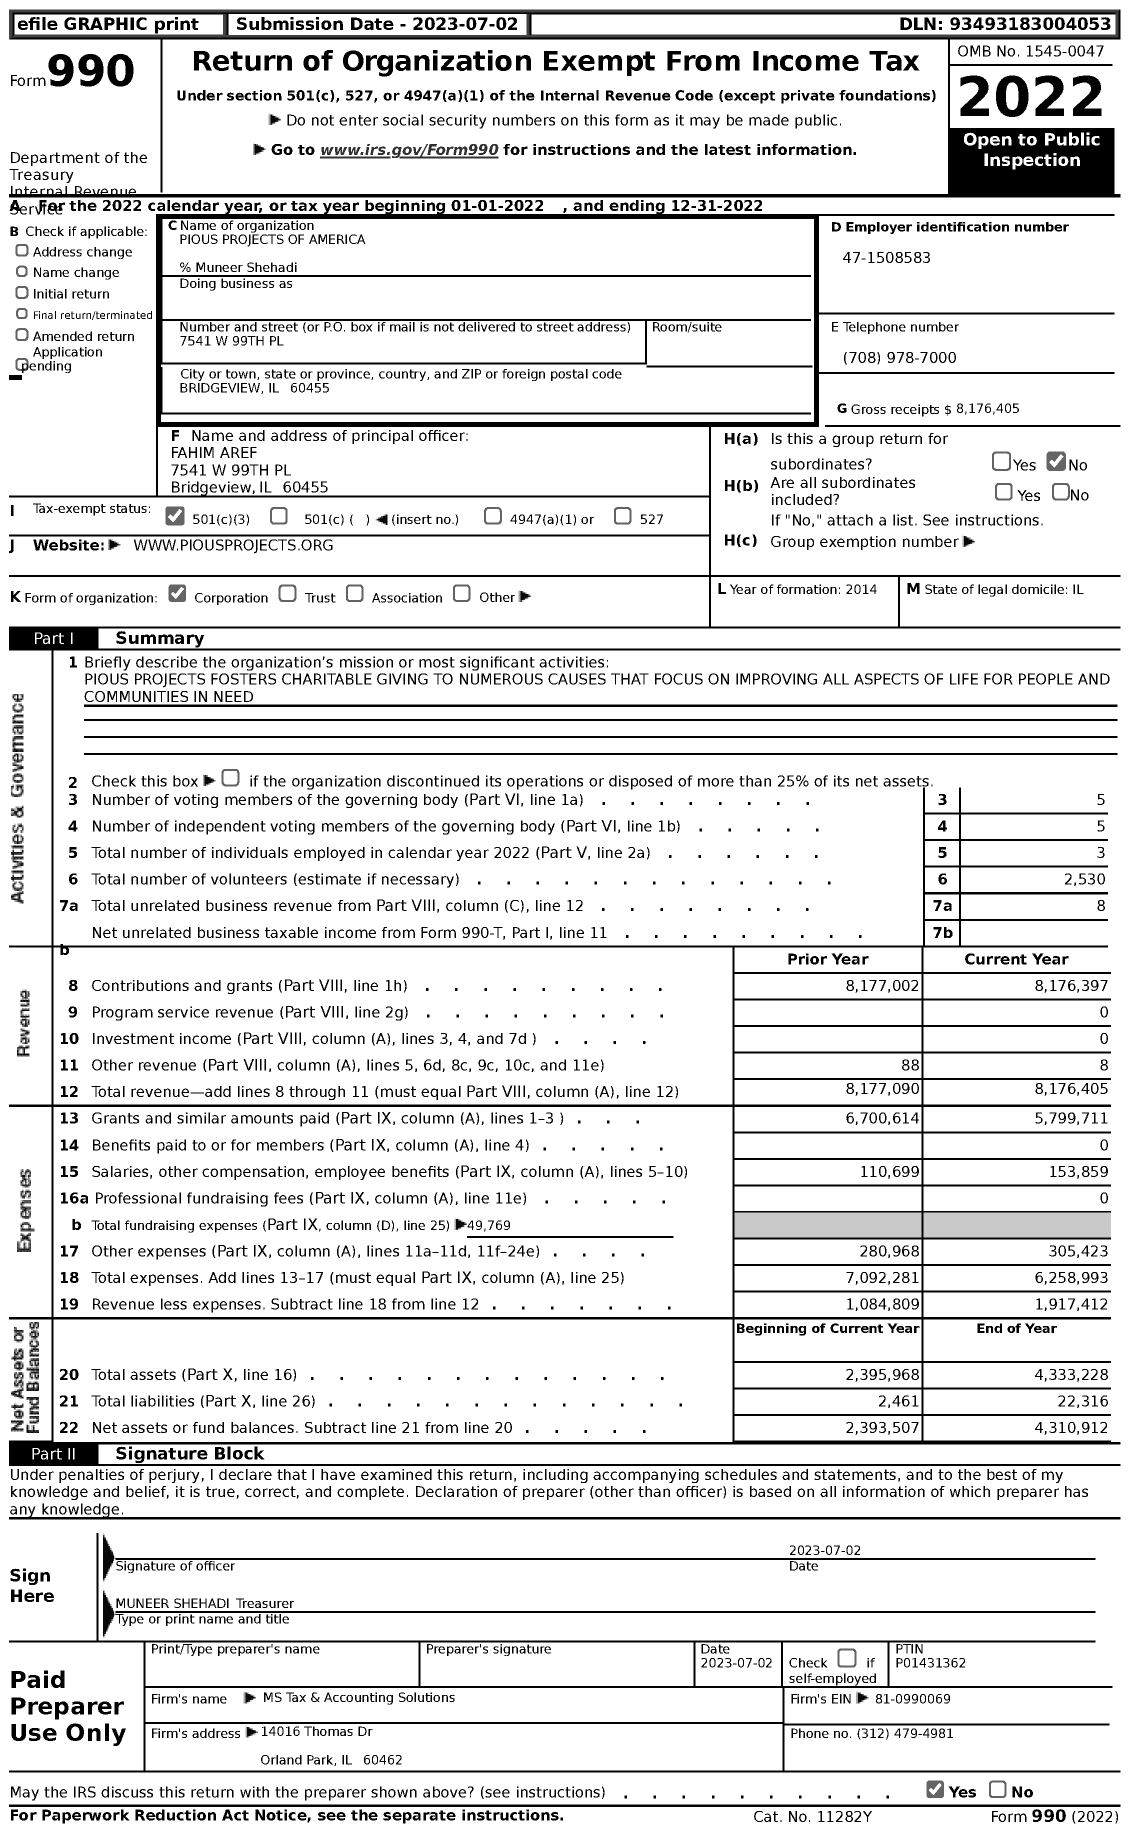 Image of first page of 2022 Form 990 for Pious Projects of America